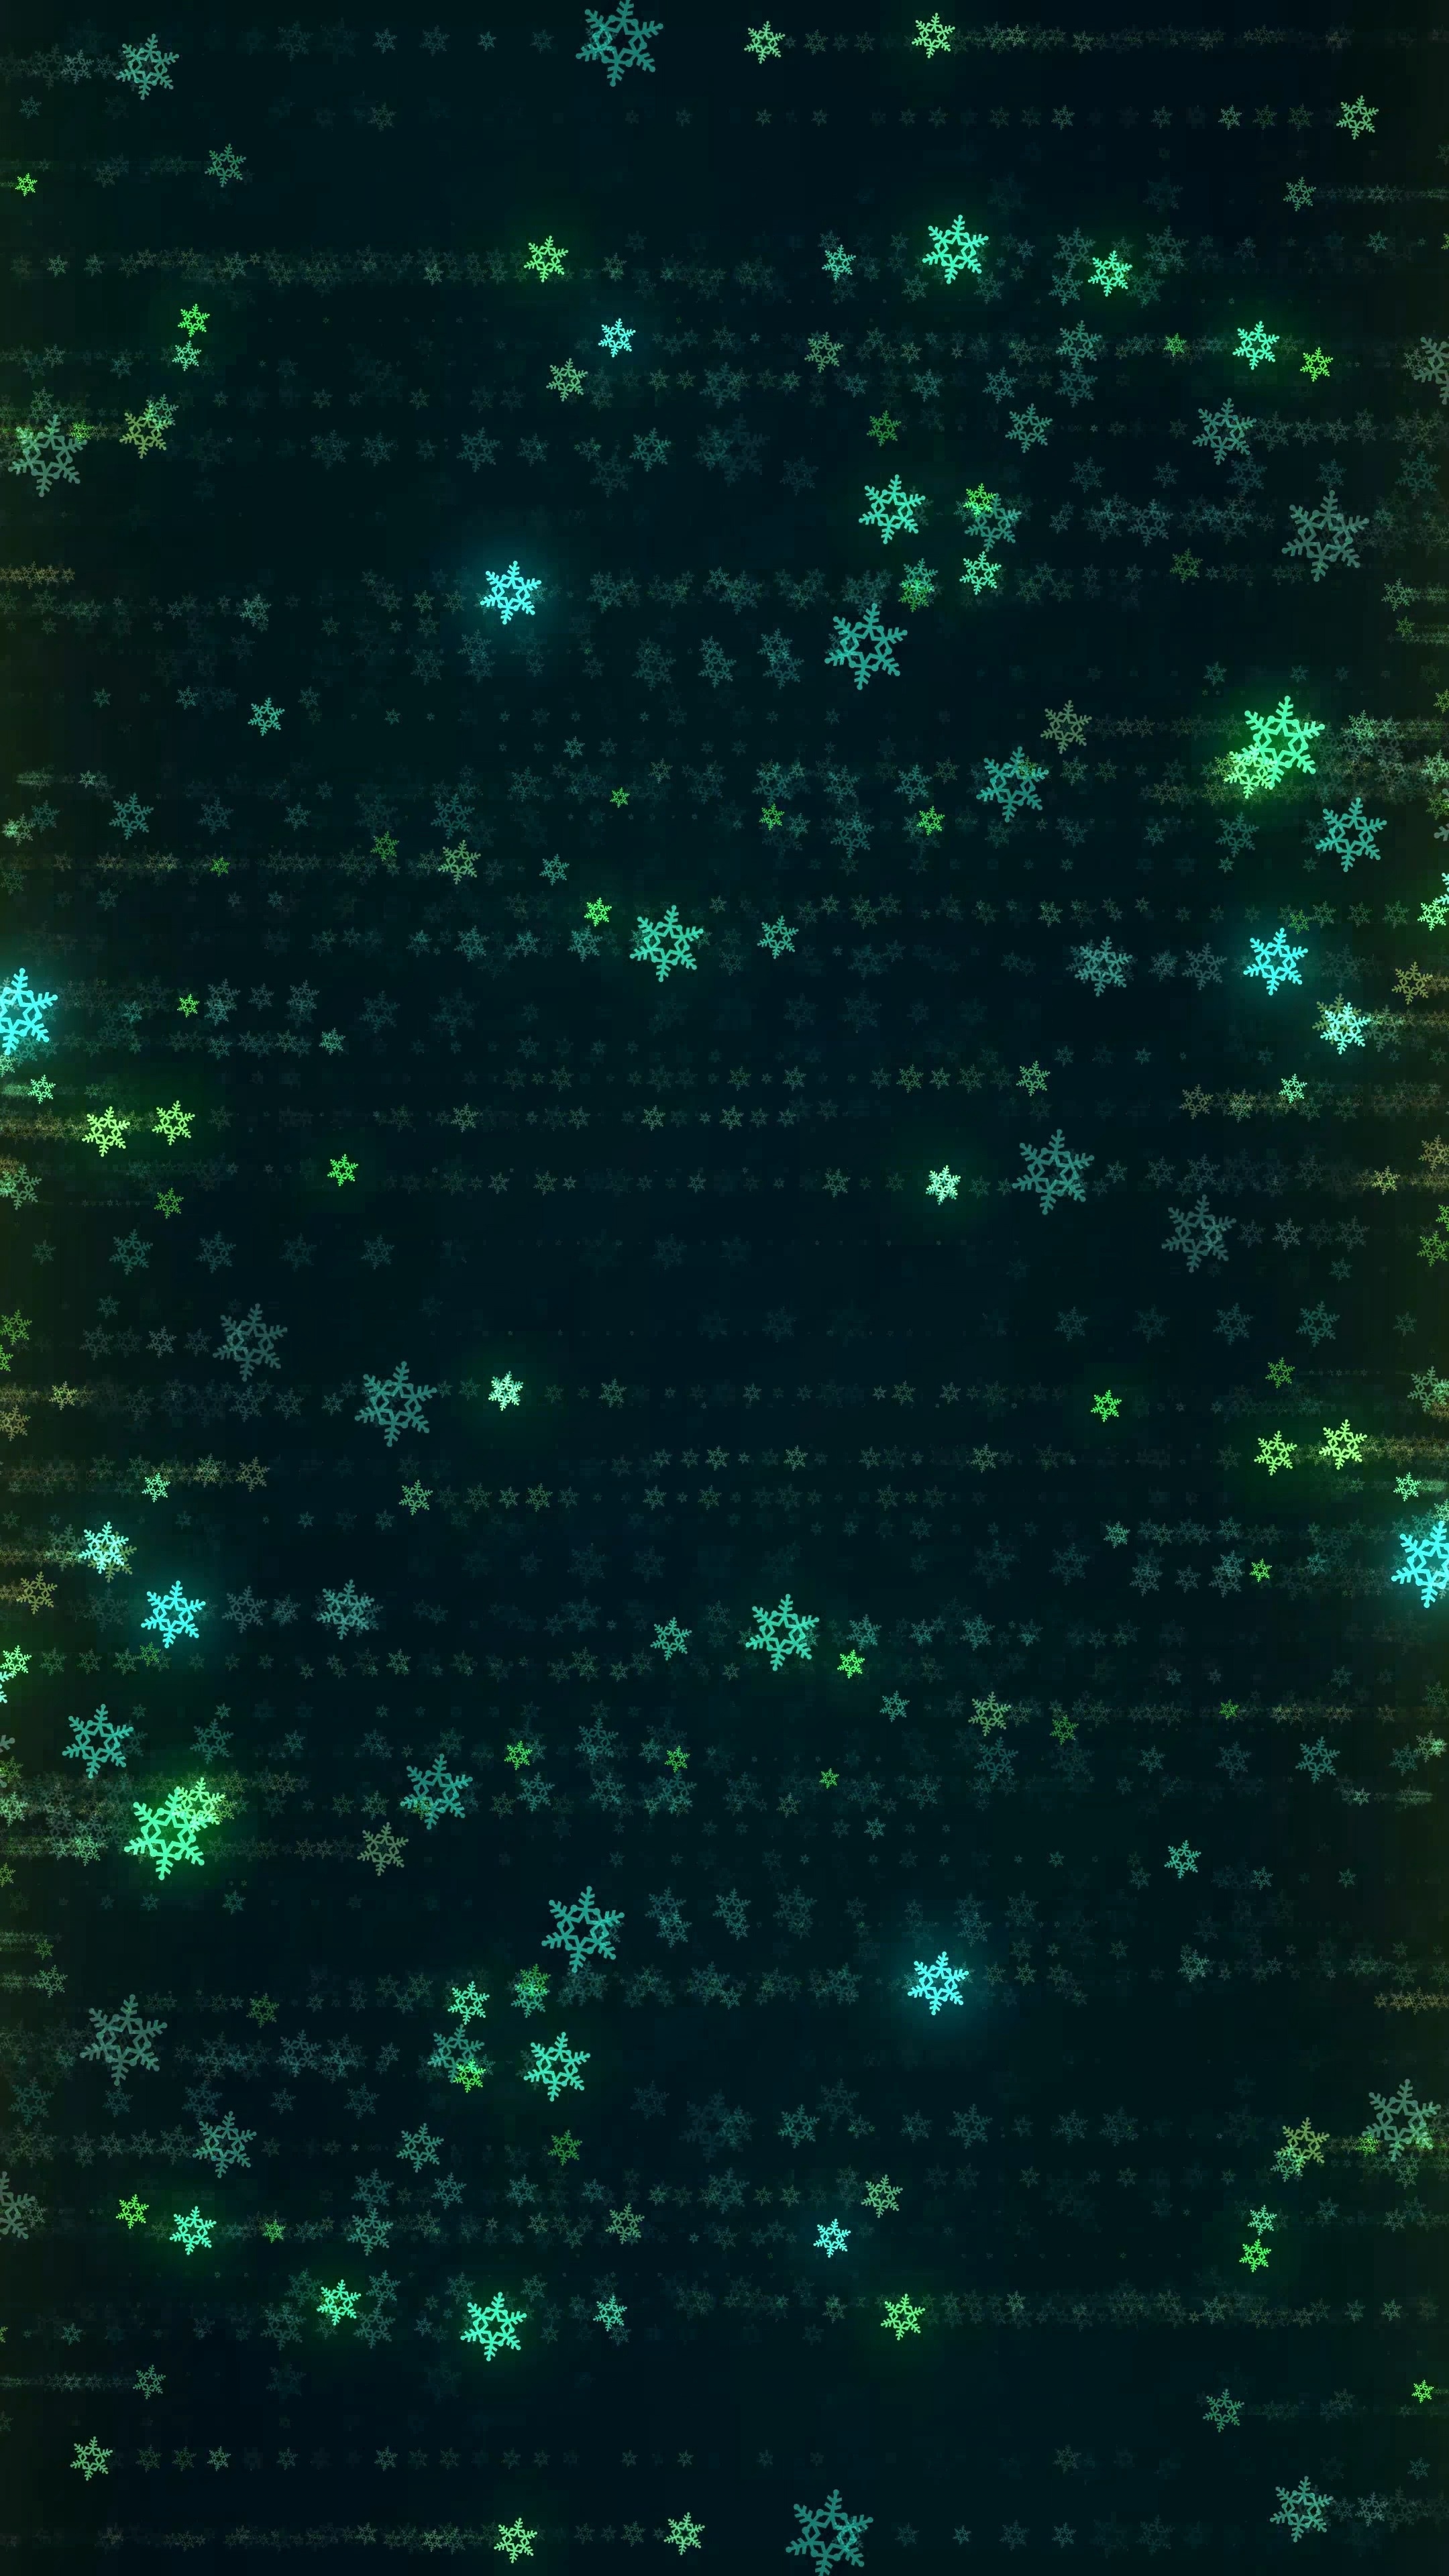 Background with computerized snowflakes